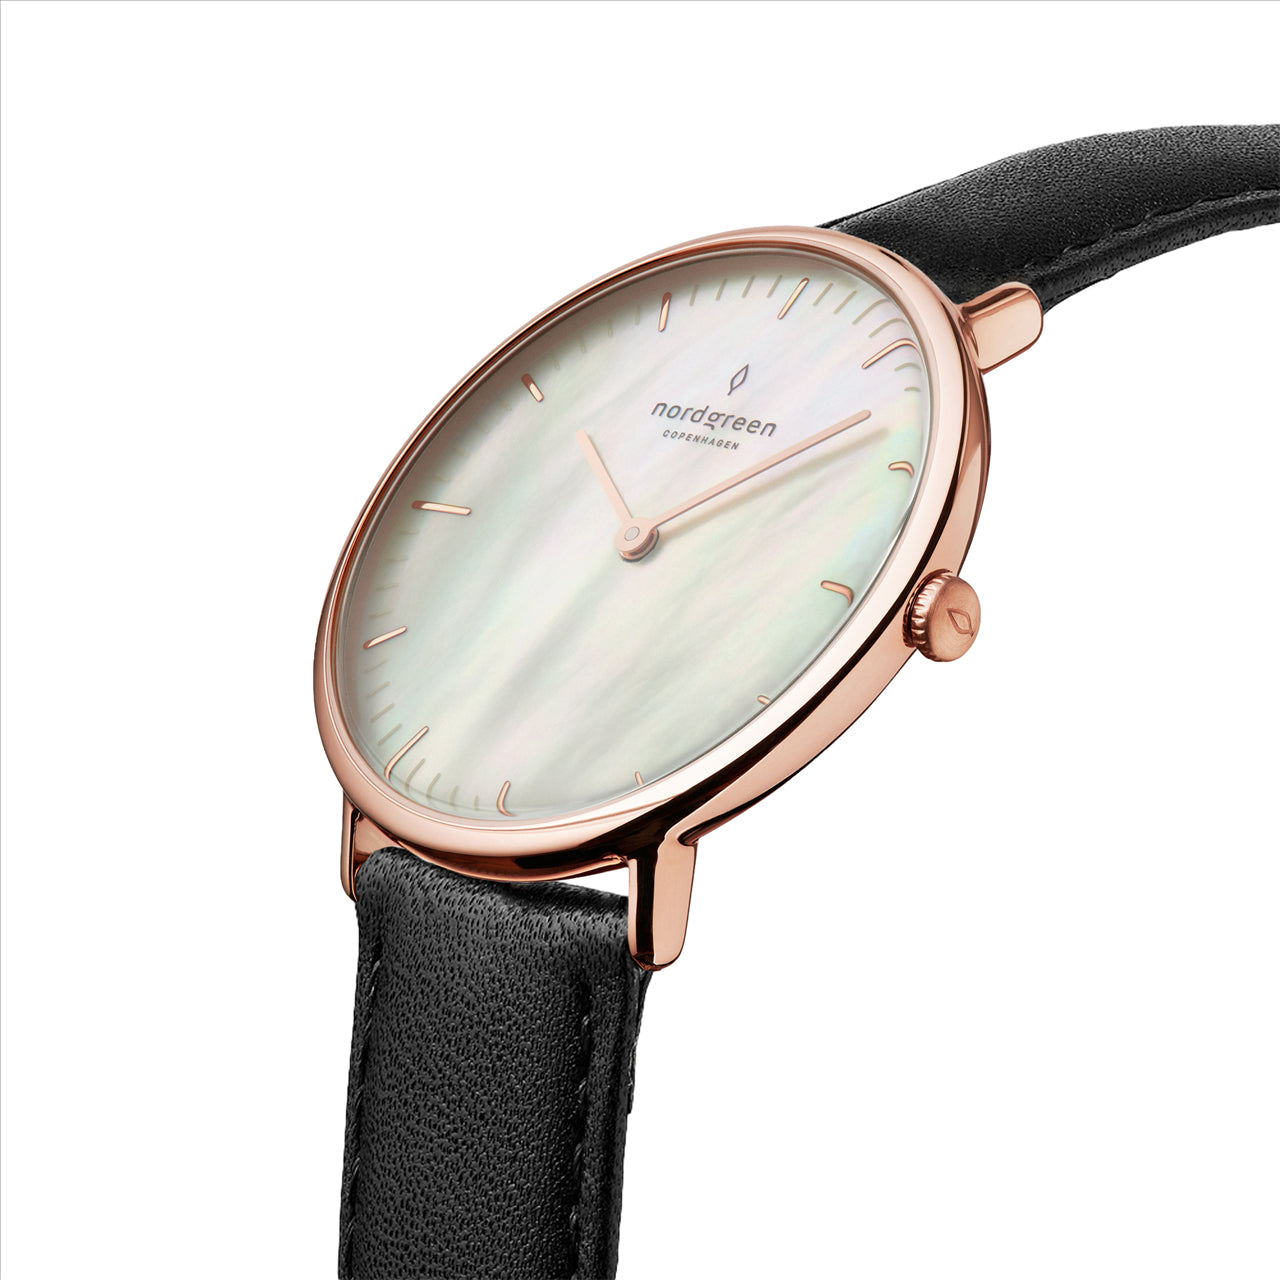 Nordgreen native womens dress watch mother of pearl dial black leather band rose gold case 28